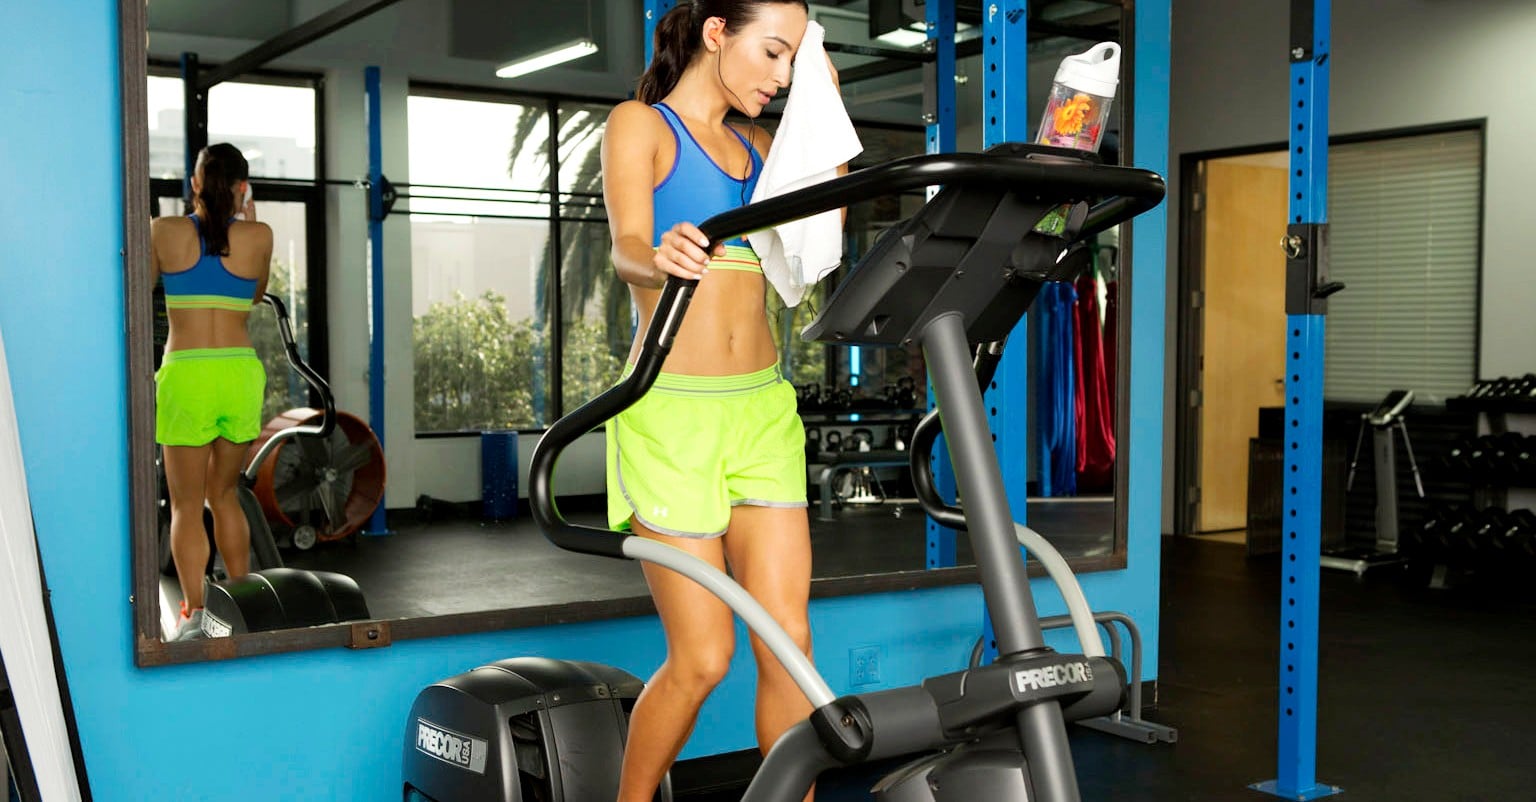 The Top 5 Cardio Machines That Are Good For Weight Loss – Fitbod